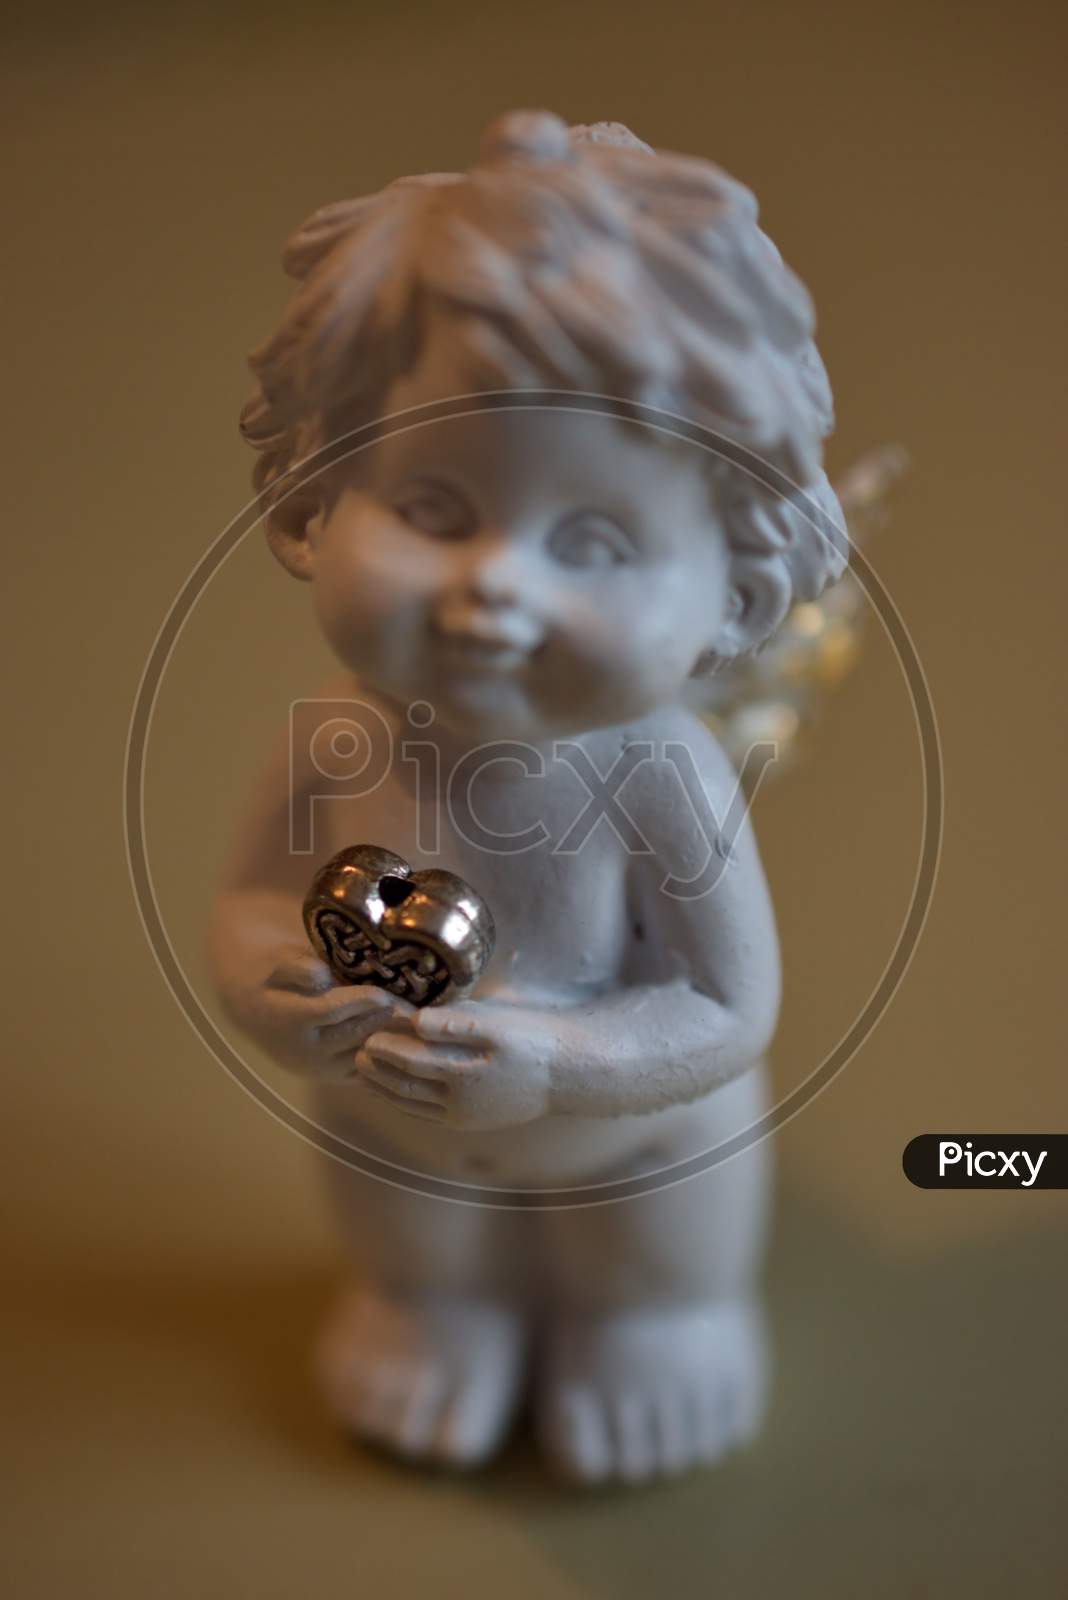 Little Child Is Holding A Golden Heart For Christmas Decoration 21.12.2020